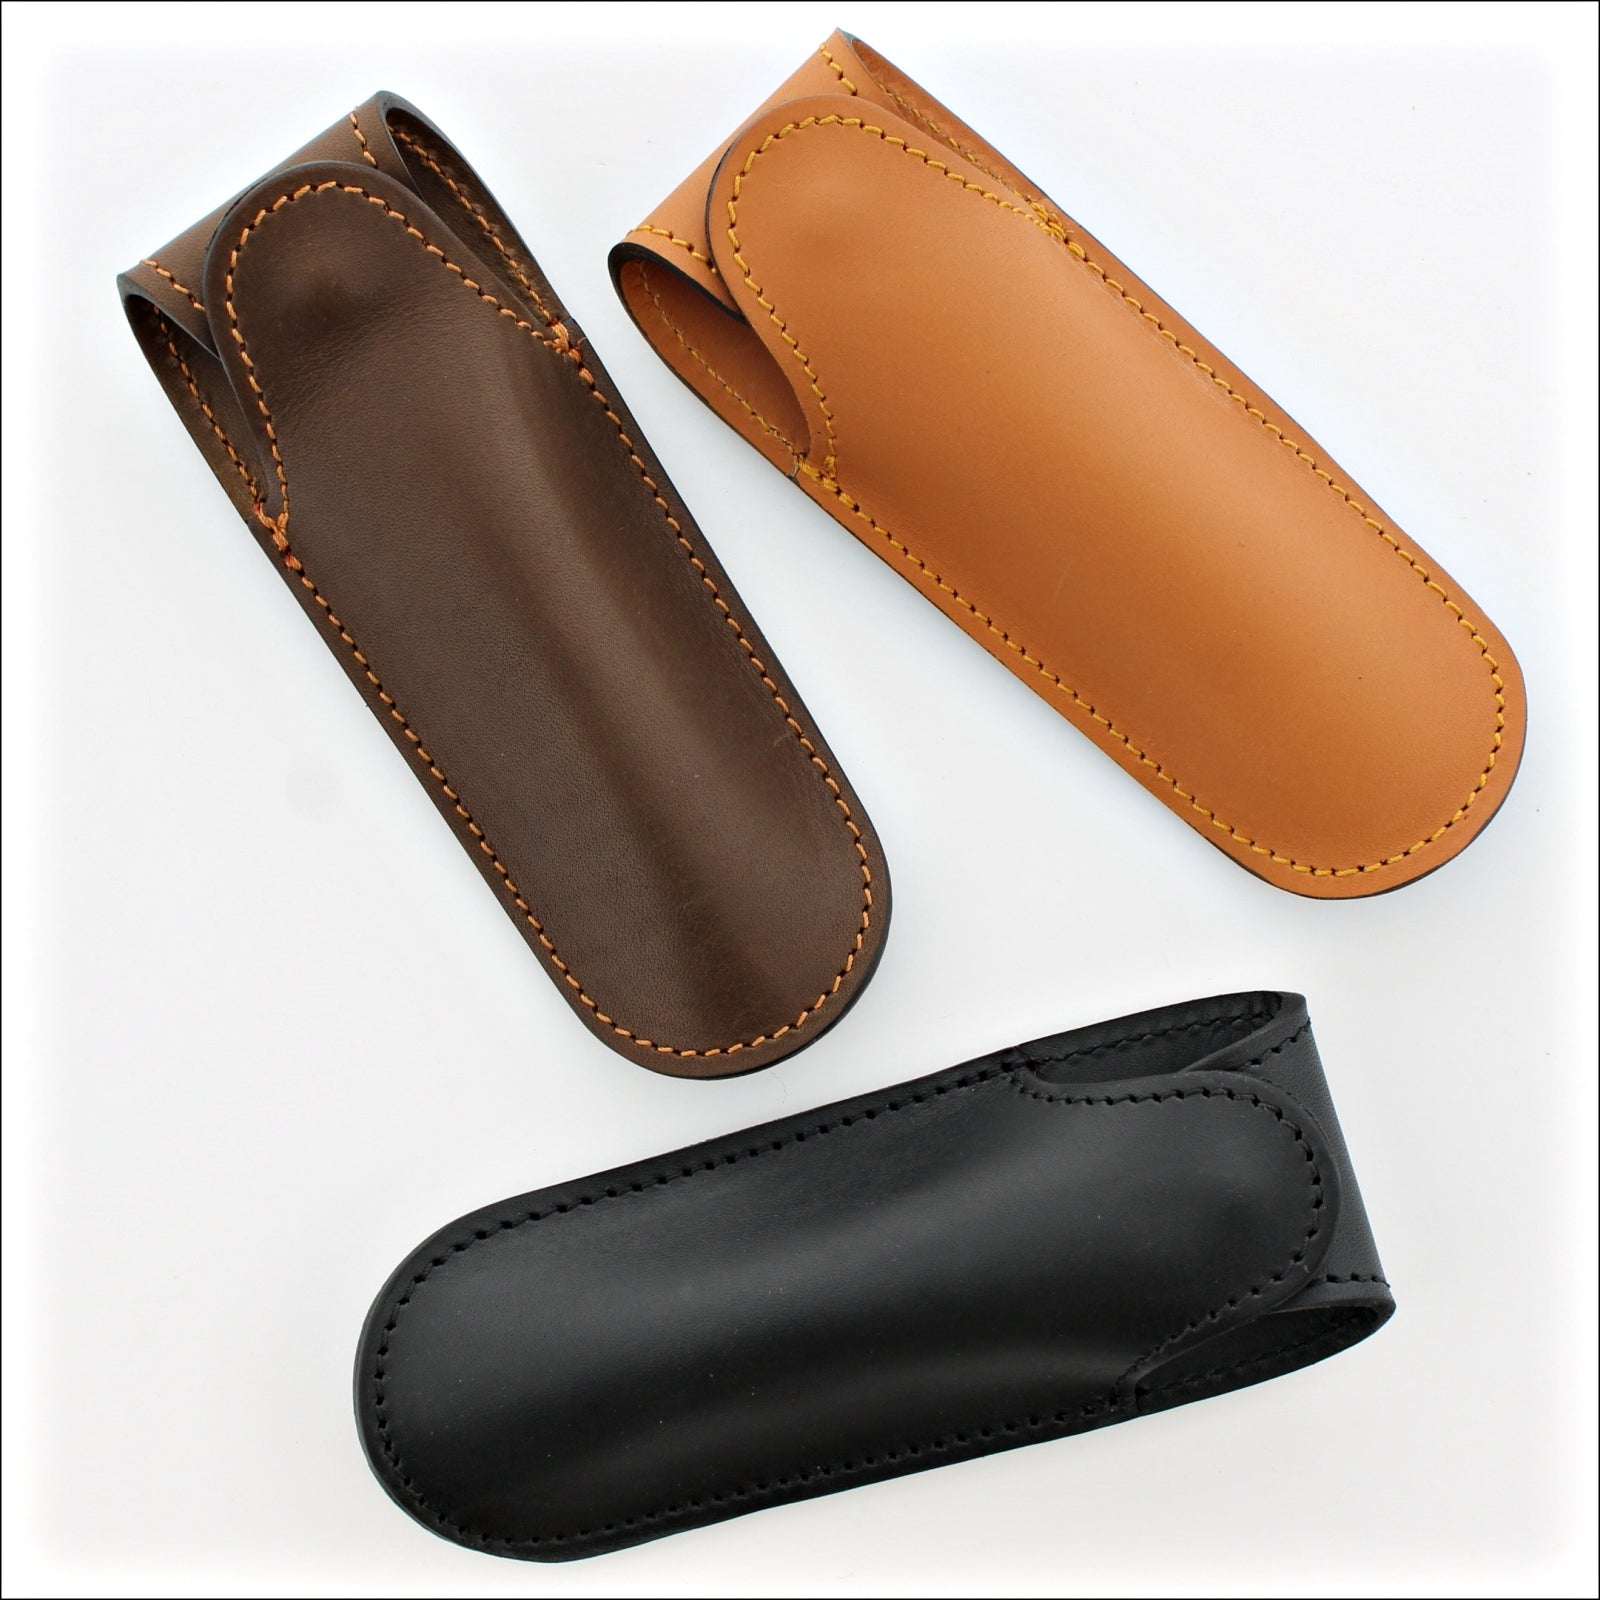 Trekking Leather Sheath for 10 to 13 cm Knife - Laguiole Imports